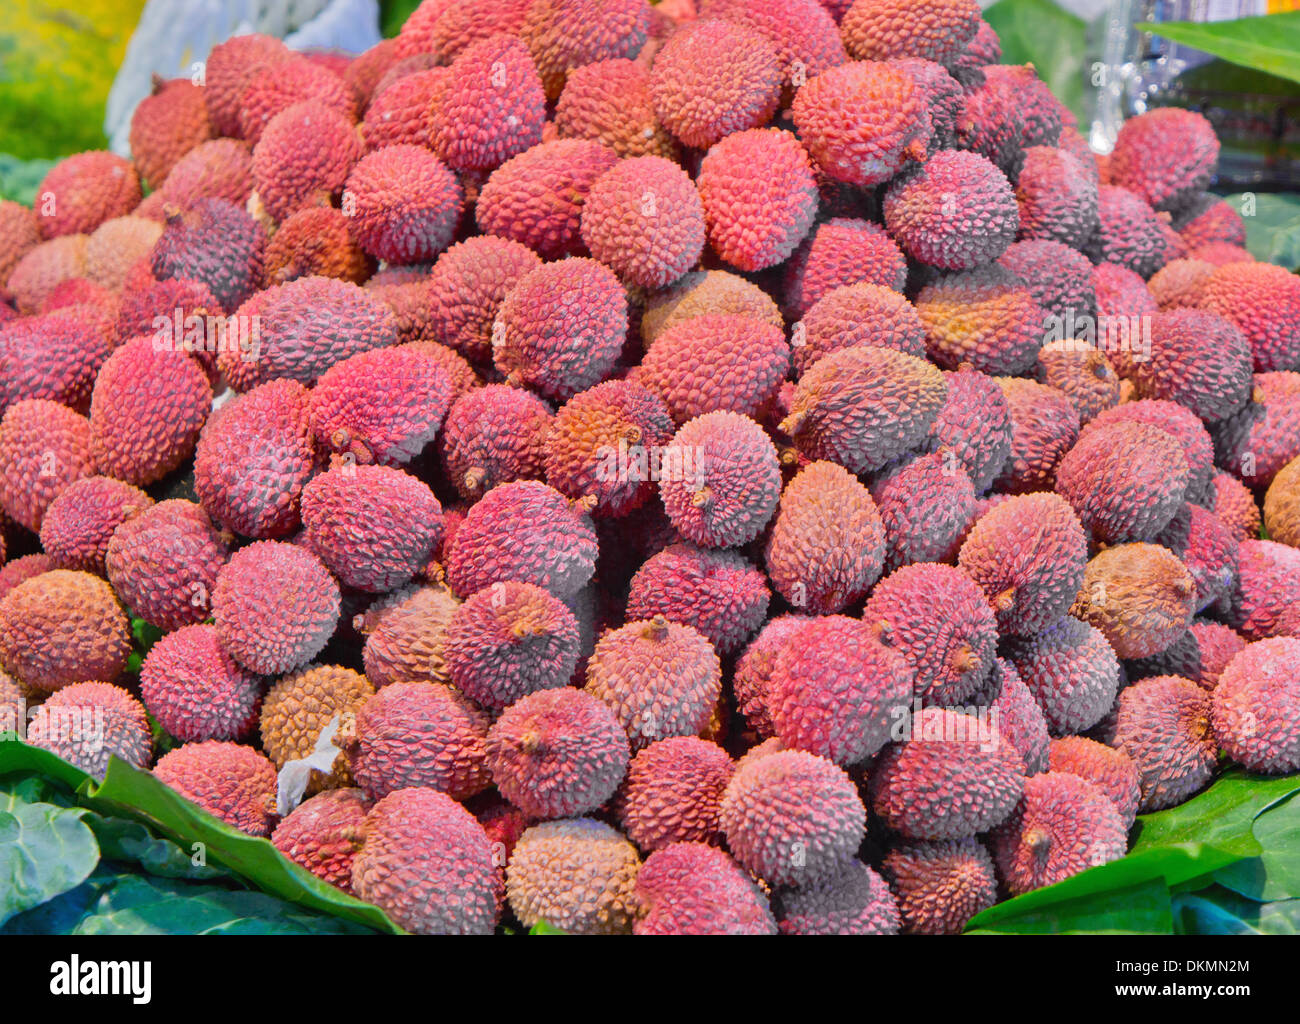 A bunch of fresh lychees on a market stall Stock Photo